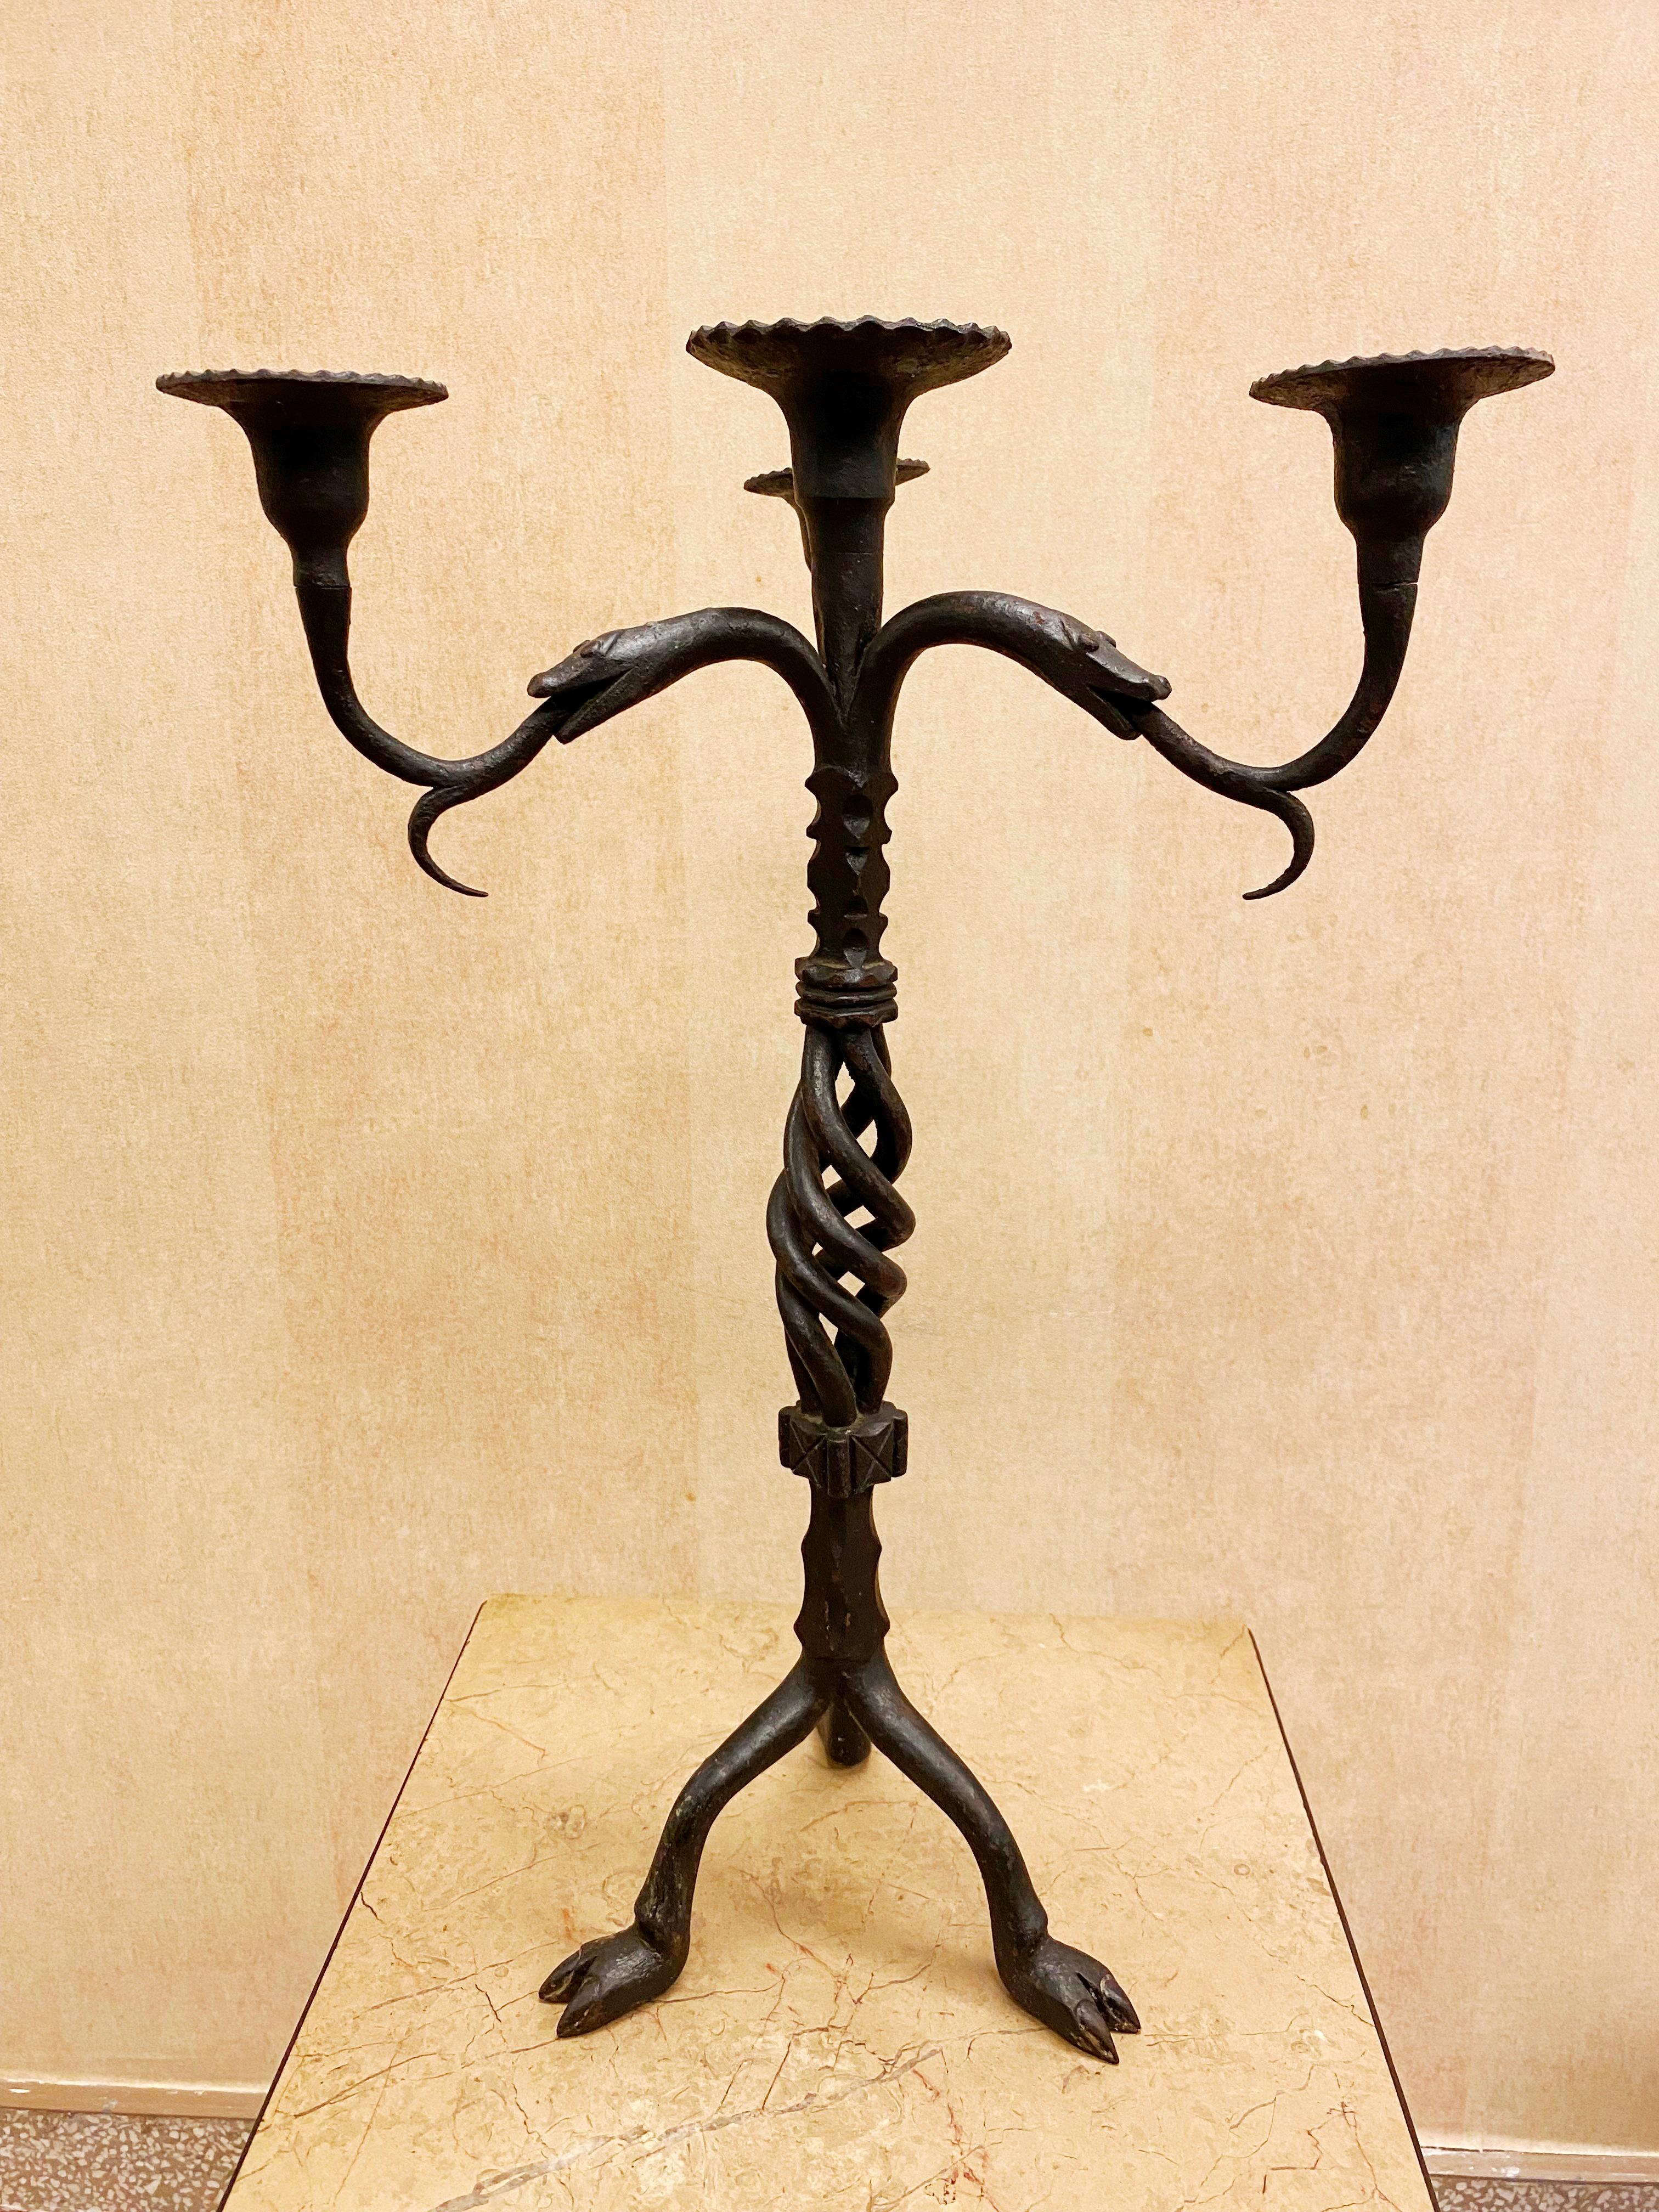 Italian Medieval Revival wrought iron candelabras with intertwined snakes, the heads holding up the drip pans with their tongues and hooved feet.